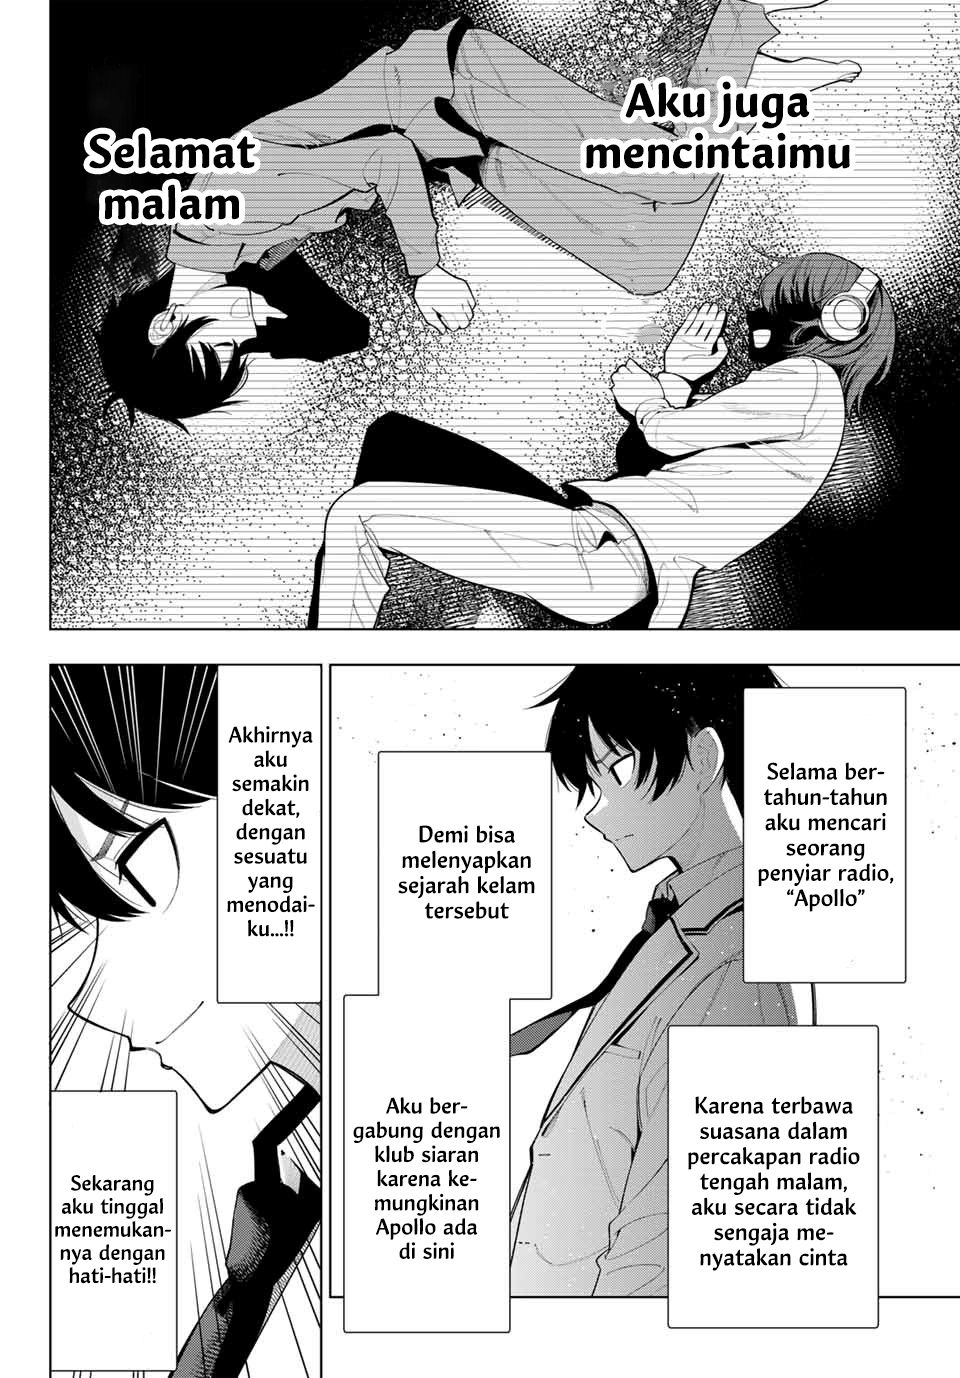 Mayonaka Heart Tune (Tune In to the Midnight Heart) Chapter 02 Image 3